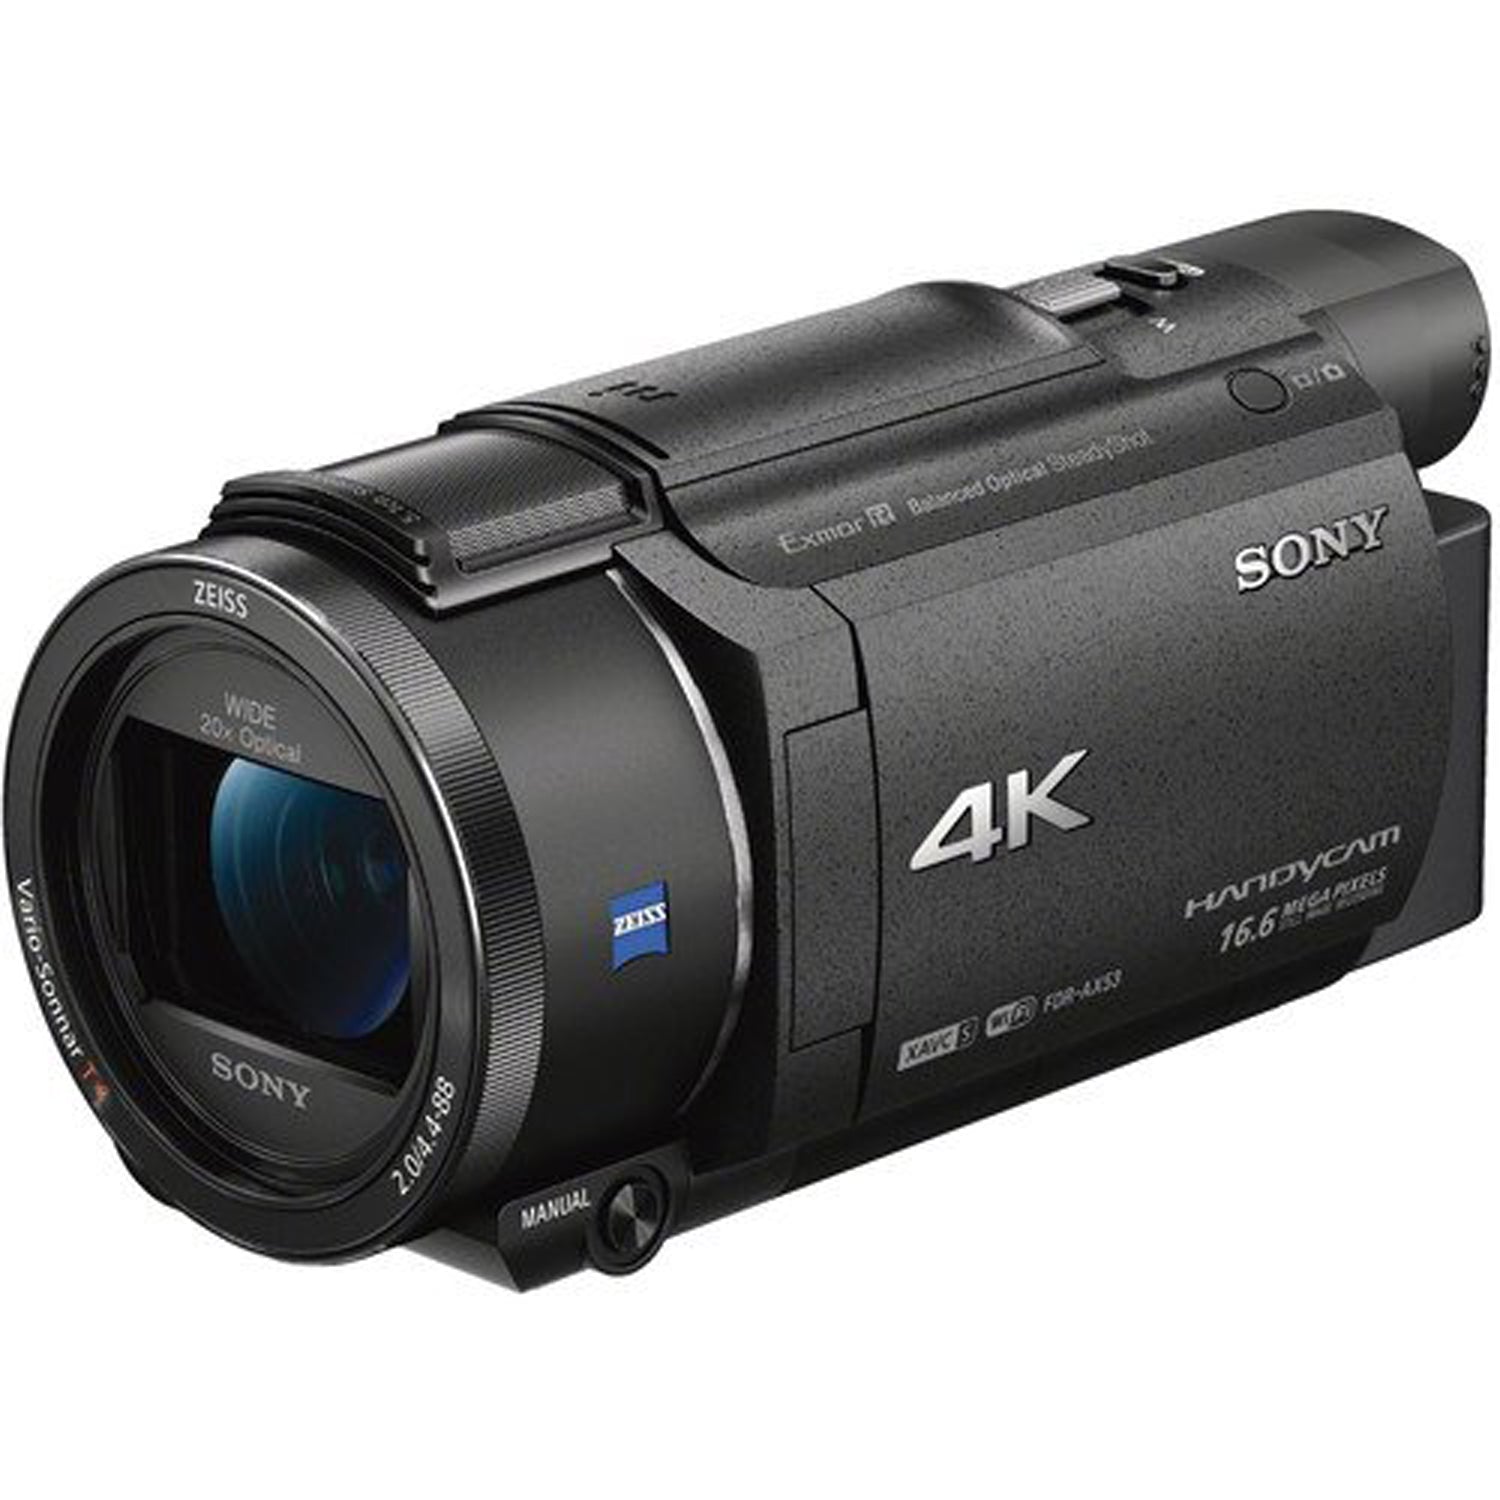 Sony FDR-AX53 4K Ultra HD Handycam Camcorder International Version With Extra Battery, Case, Memory Card Base Bundle